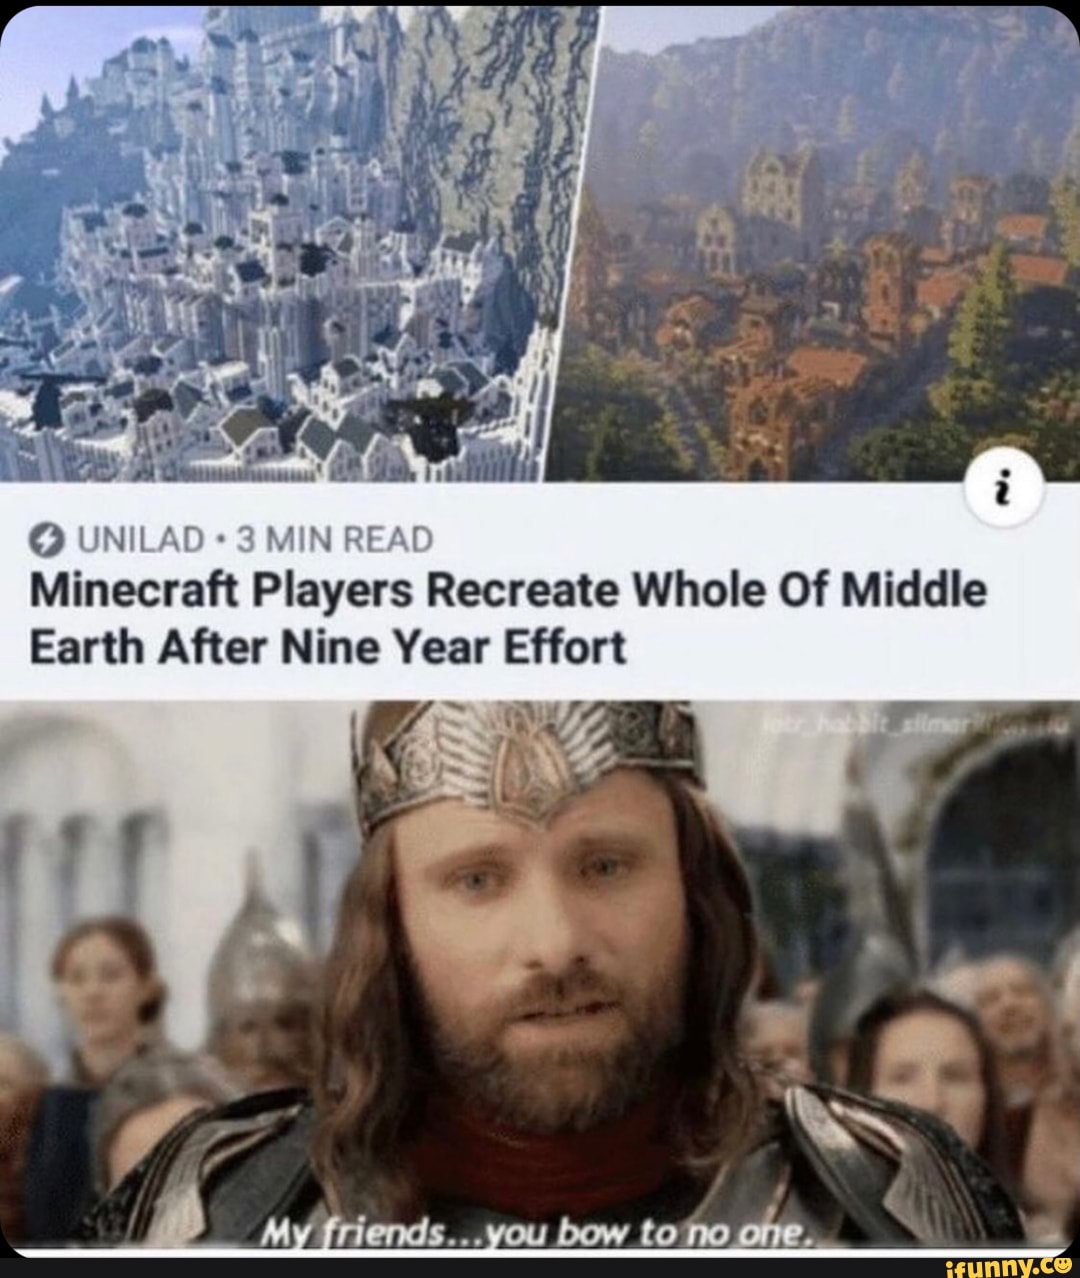 UNILAD 3 MIN READ Minecraft Players Recreate Whole Of Middle Earth After  Nine Year Effort bow to - iFunny Brazil